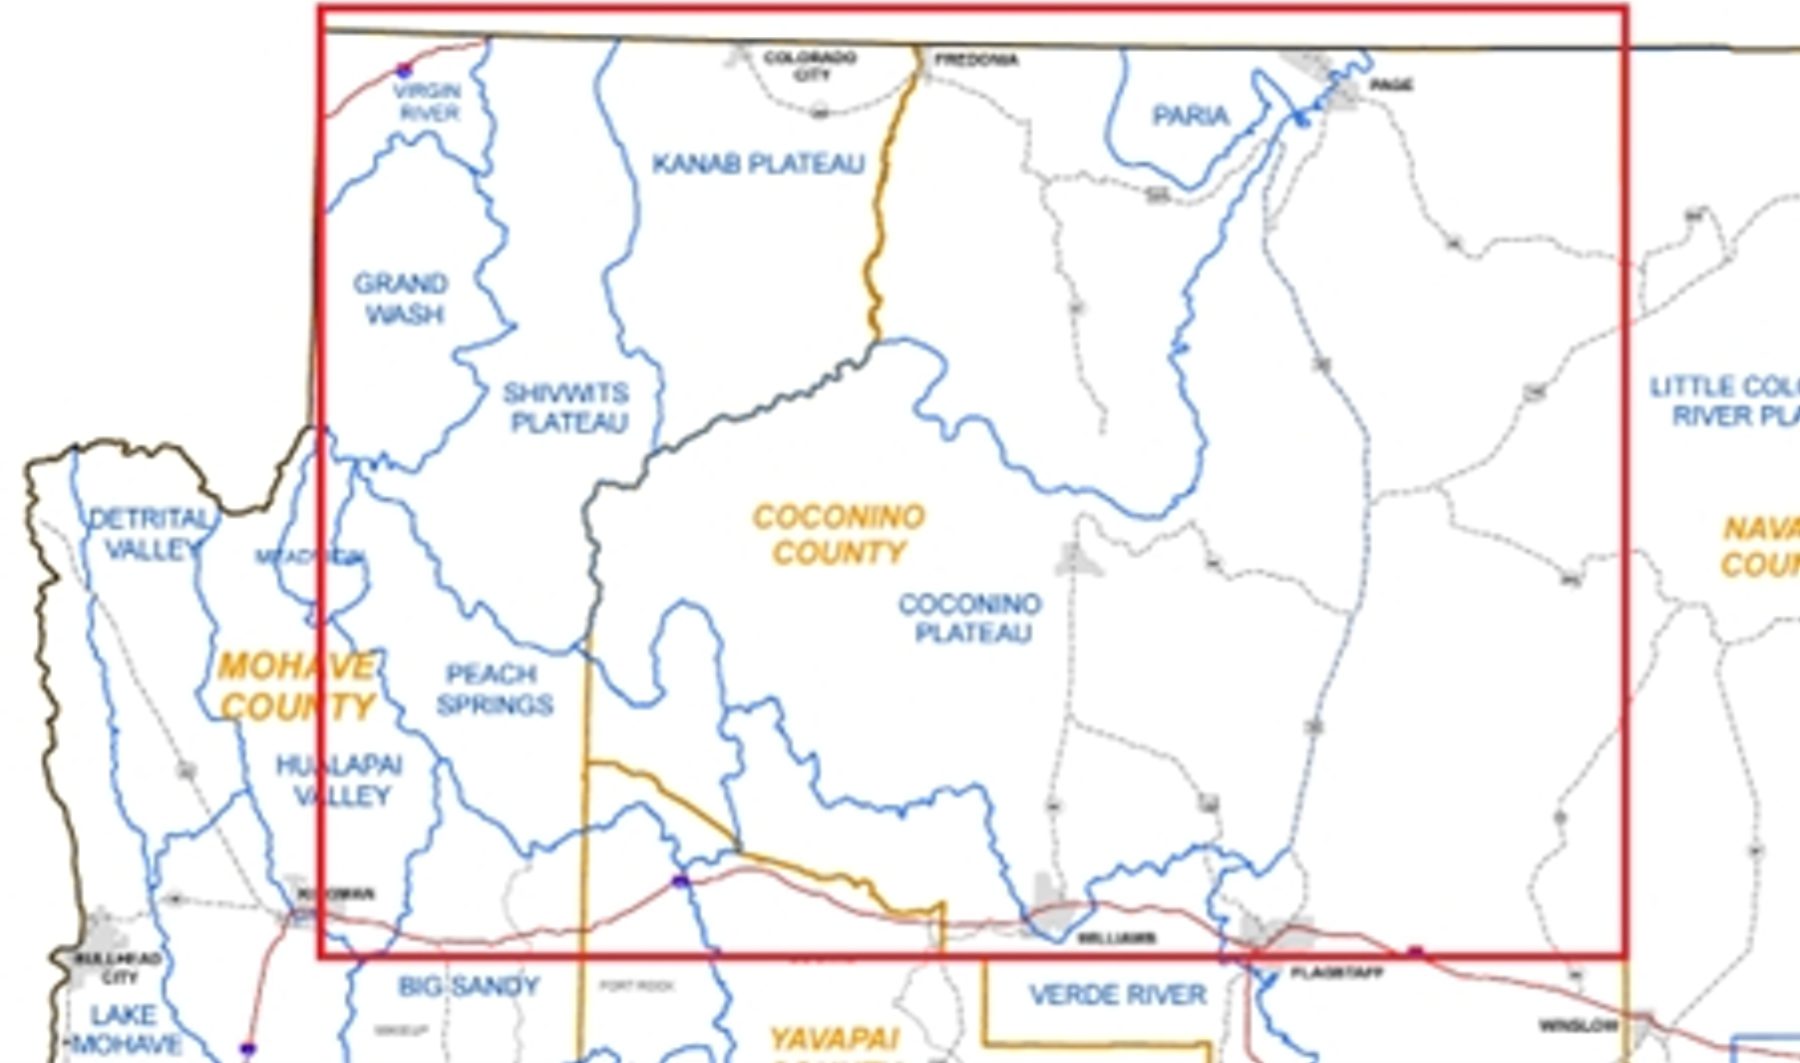 Arizona will measure groundwater in the Coconino Plateau, in the northwest part of the state. The last major surveys in the region were done in the 1970s and 1990s.